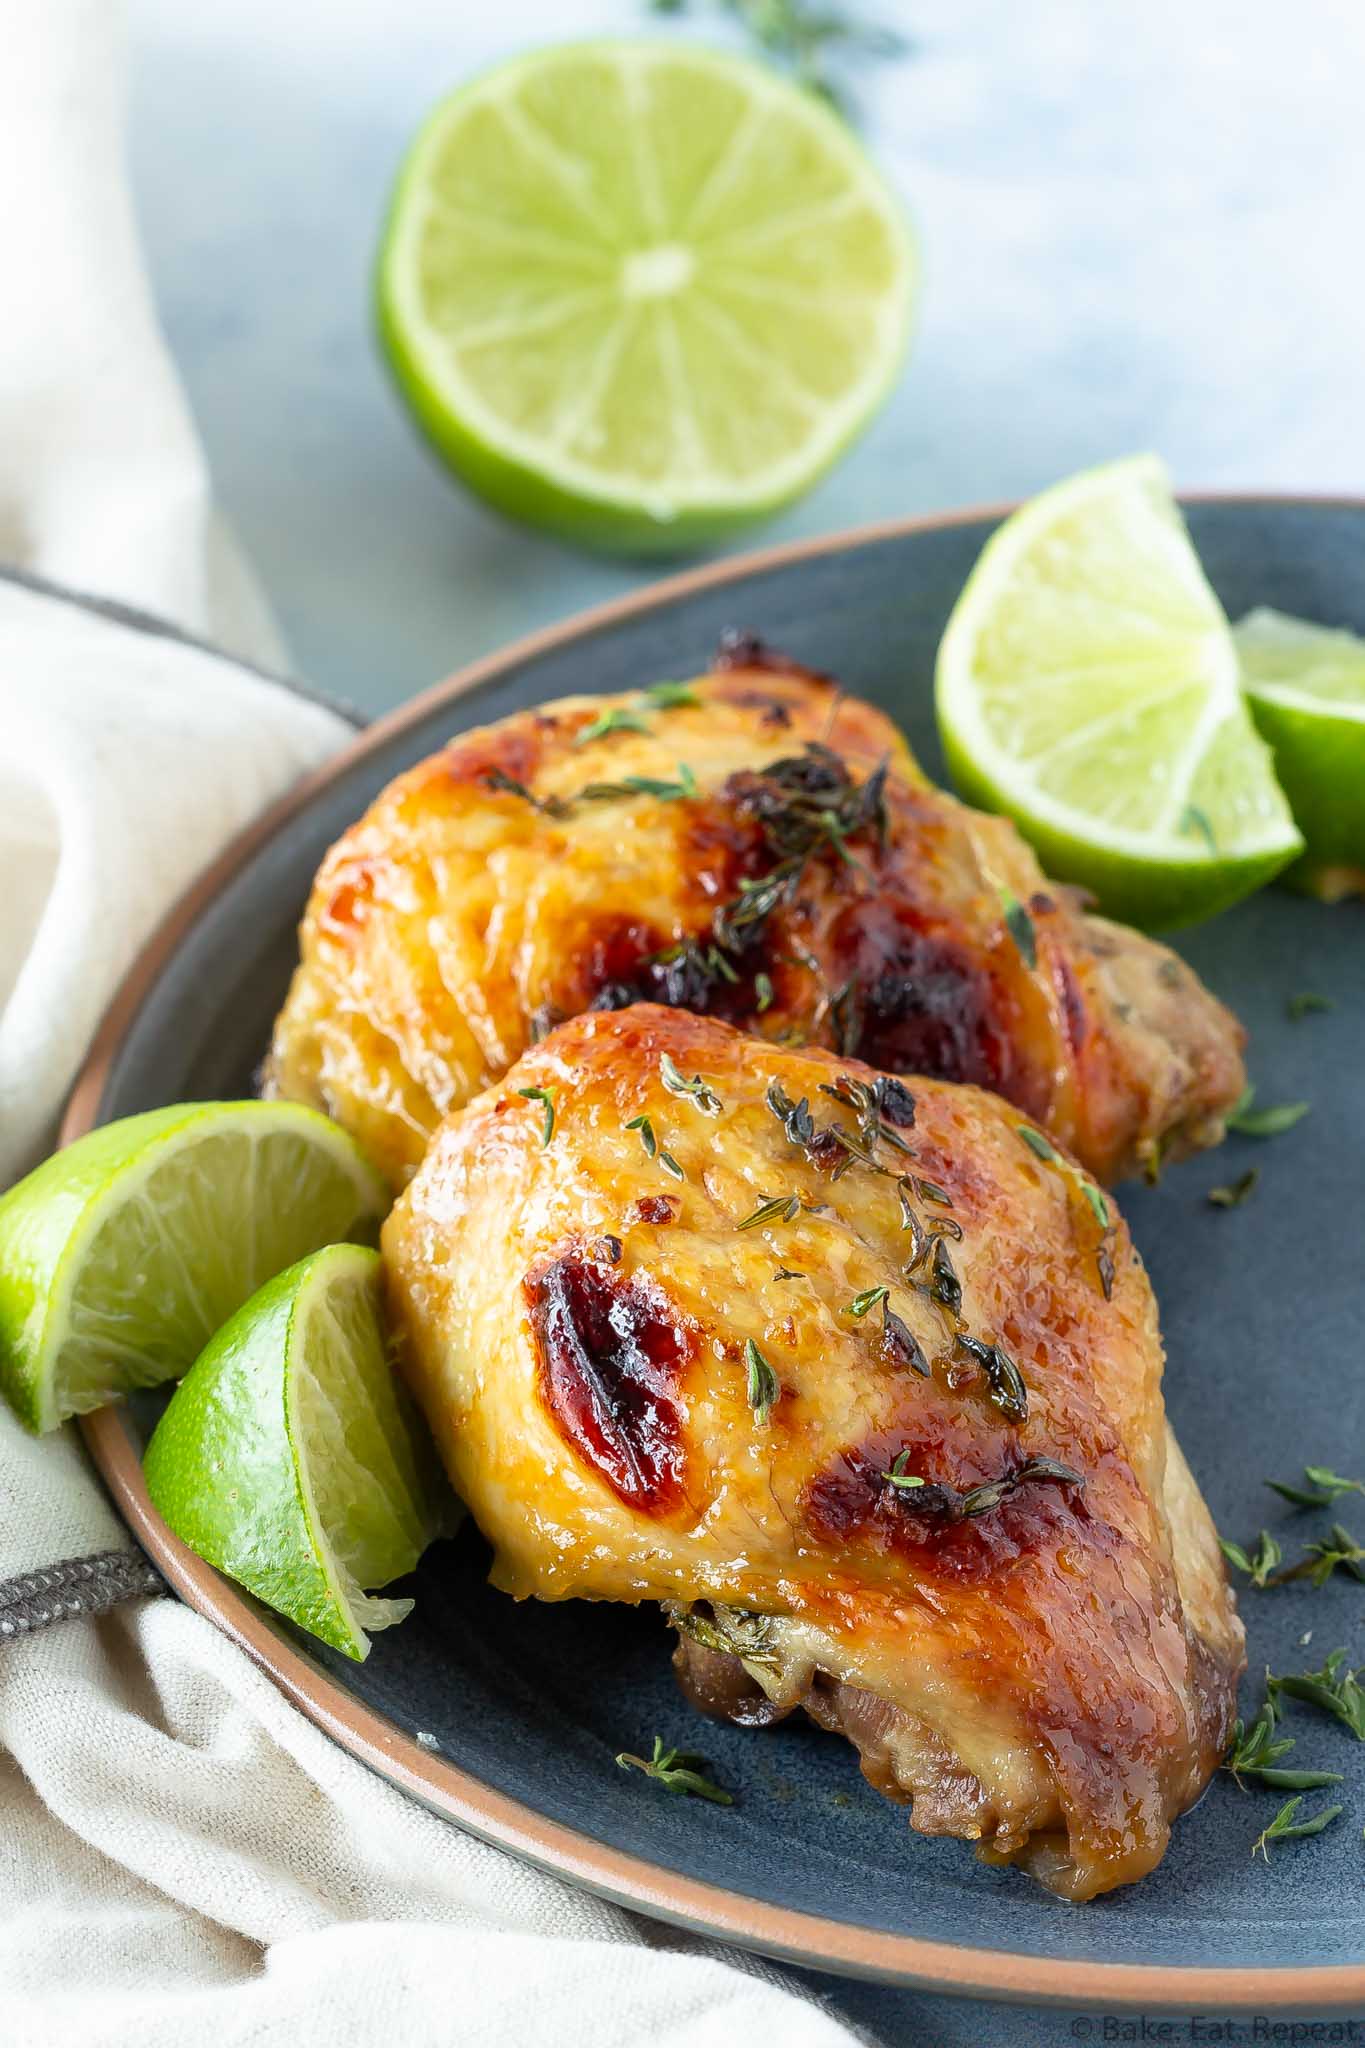 Honey Lime Baked Chicken Thighs - Bake. Eat. Repeat.